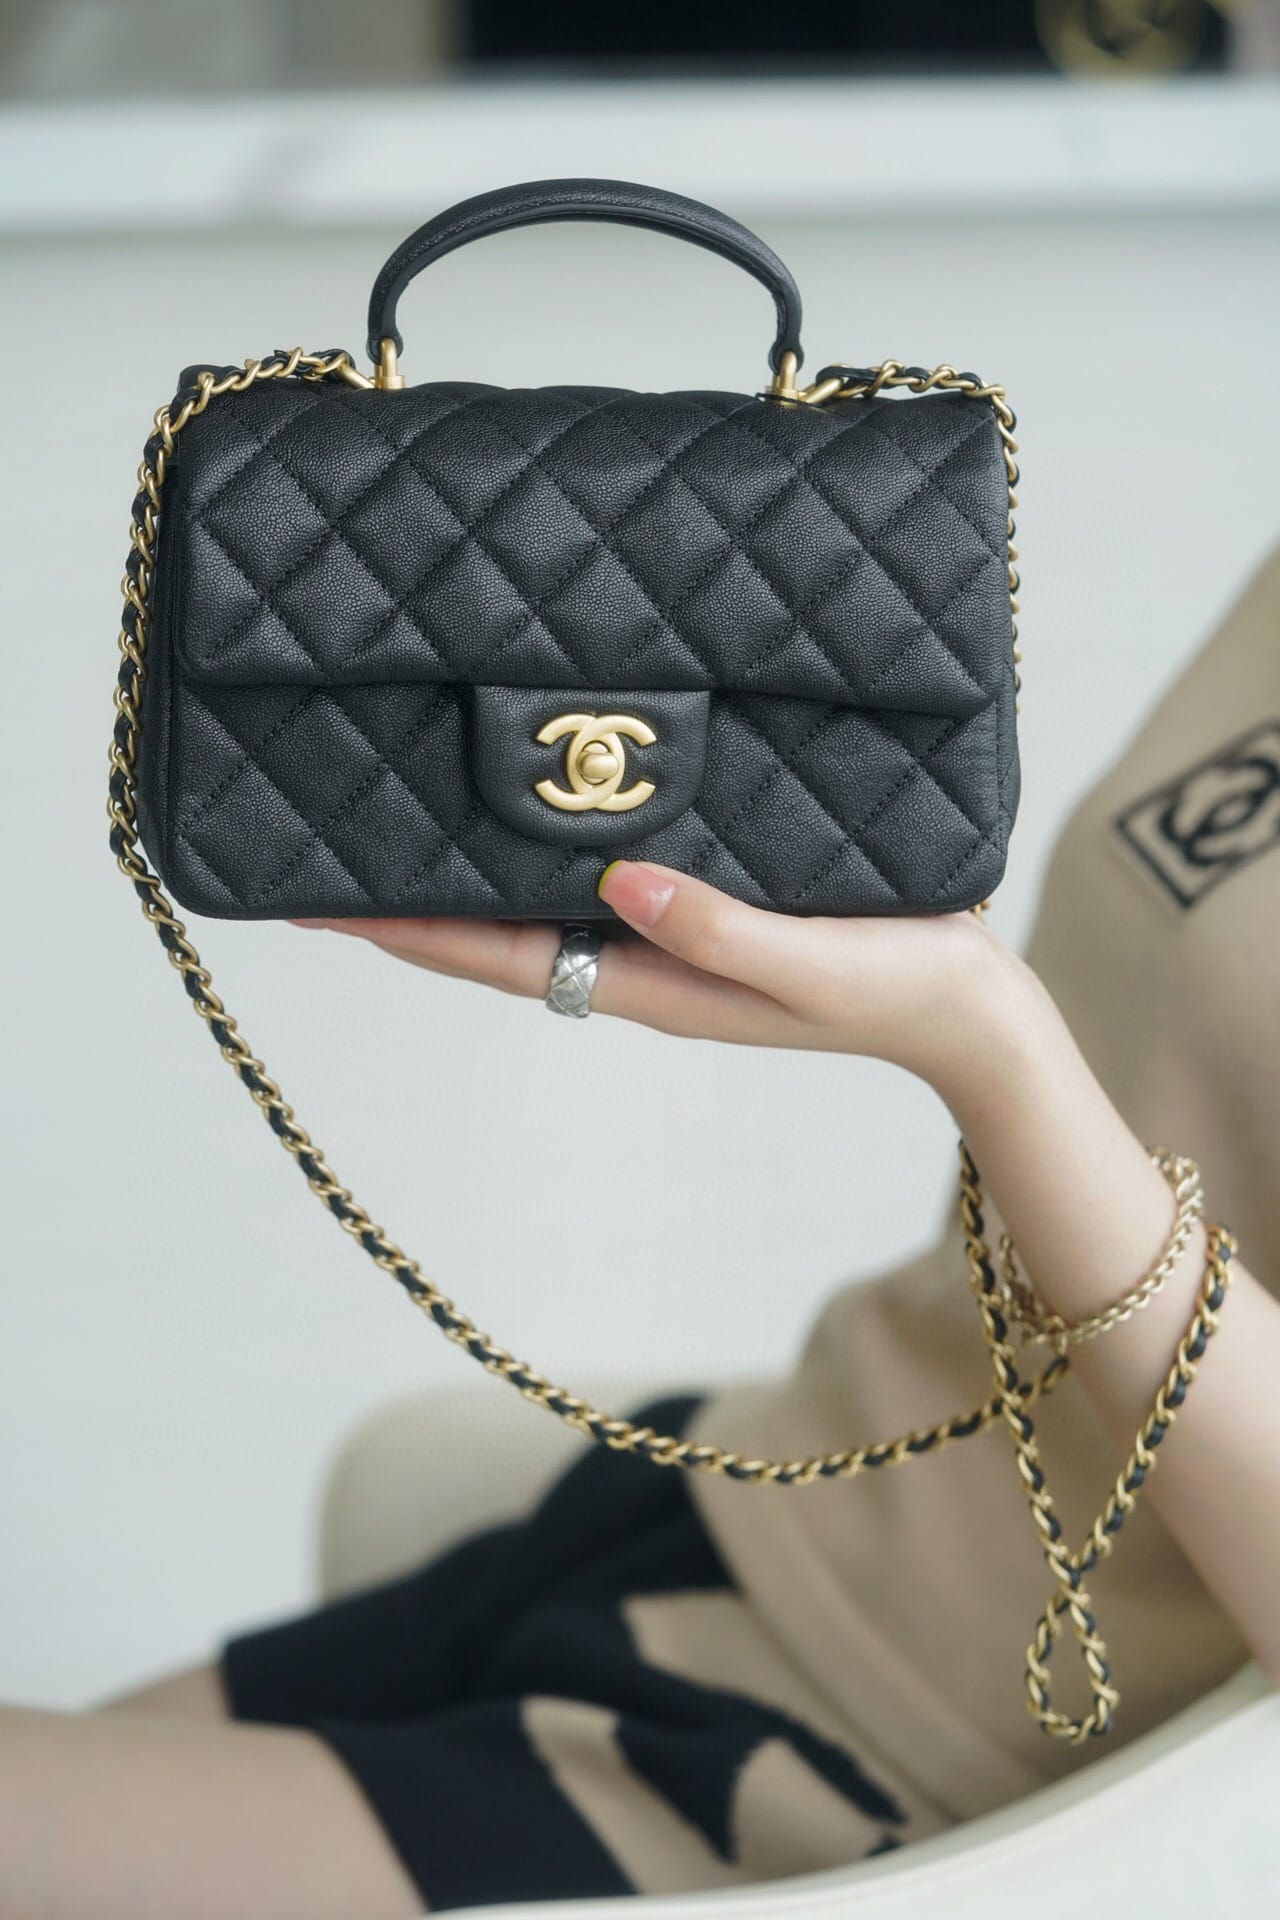 CHANEL MINI FLAP BAG WITH TOP HANDLE, SILVER